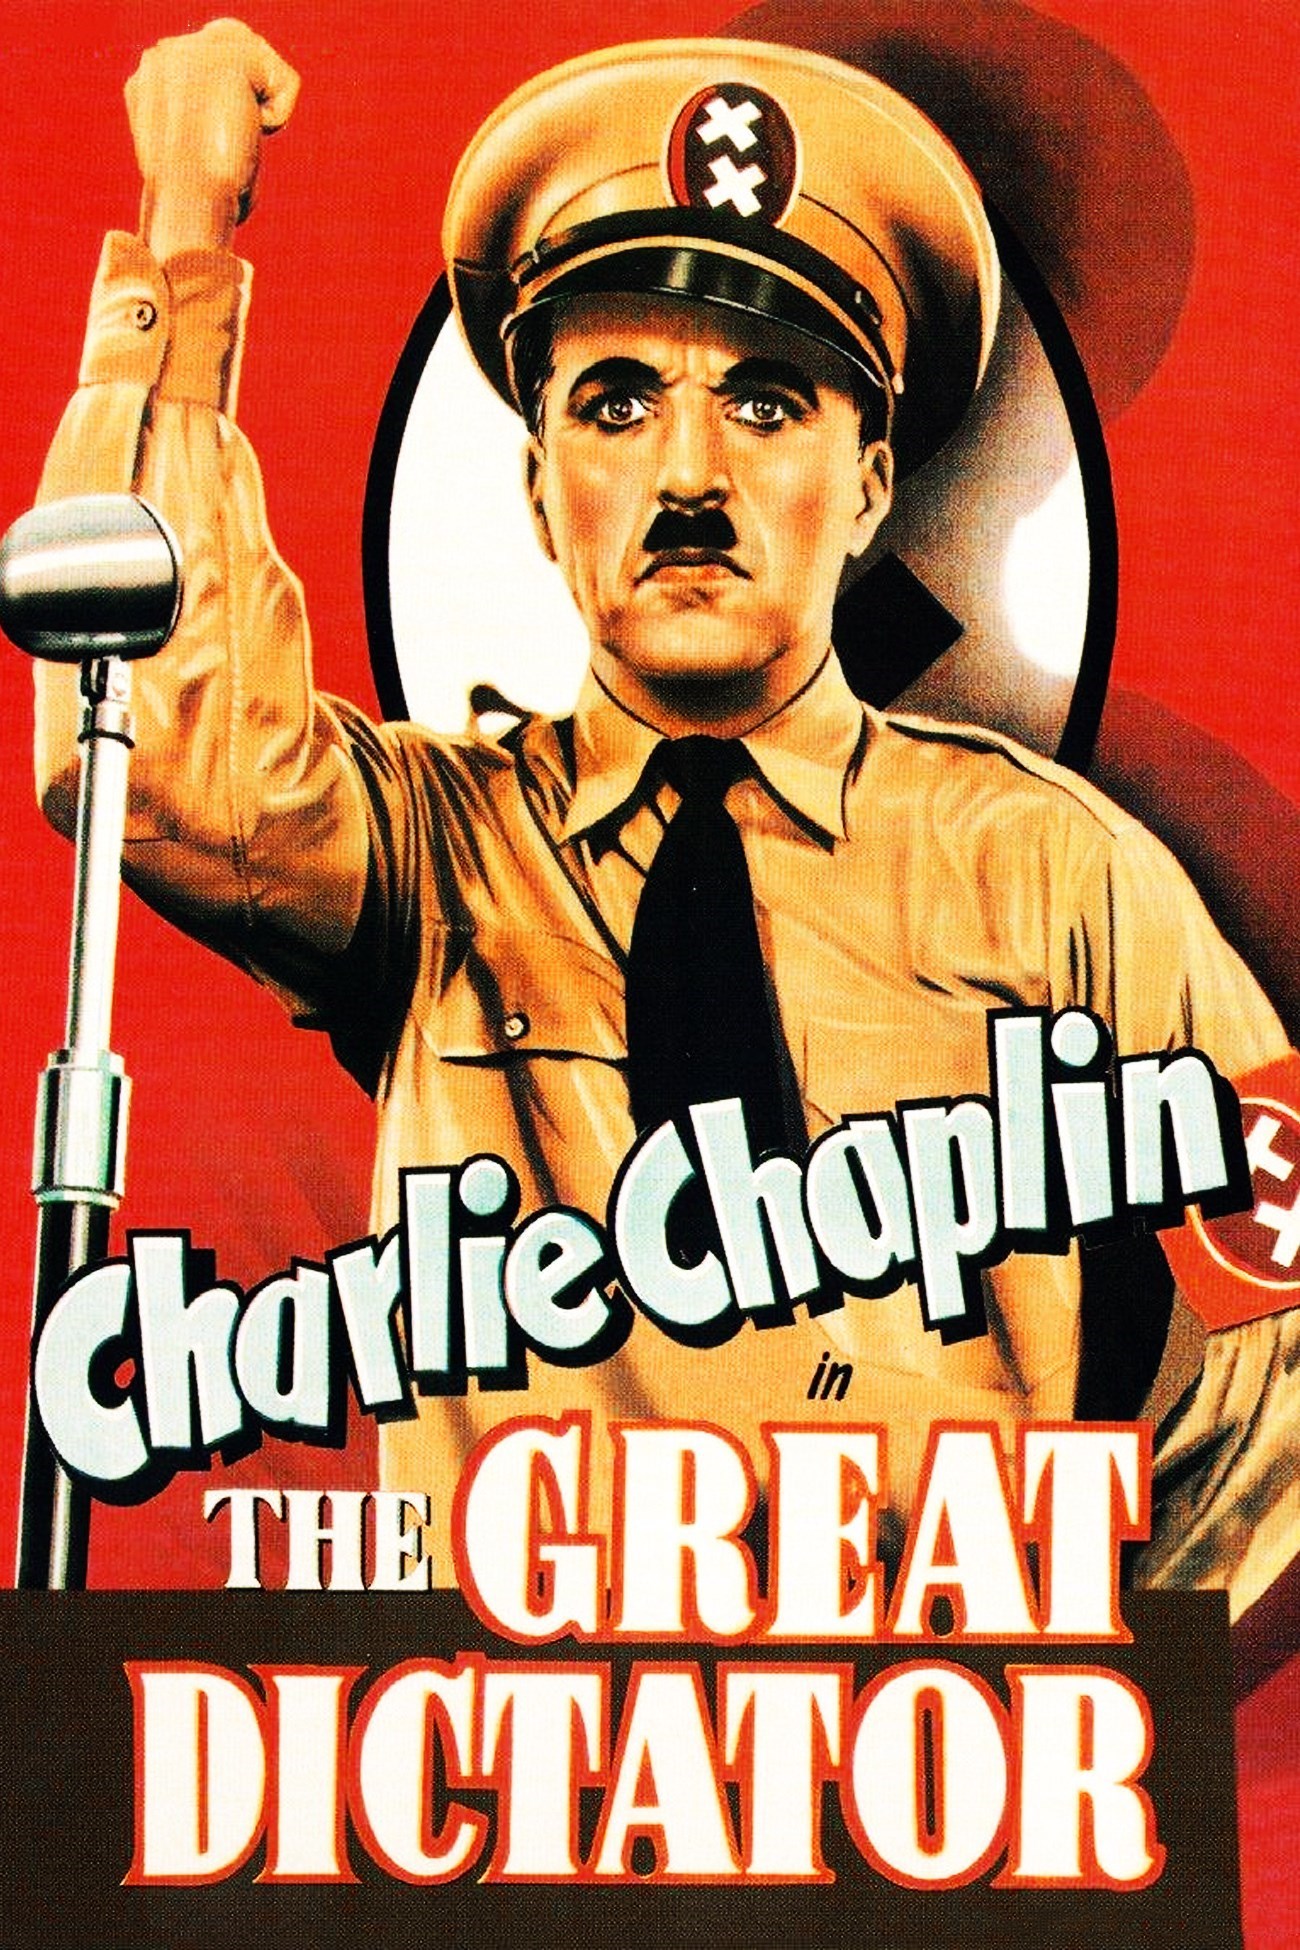 The Great Dictator #10